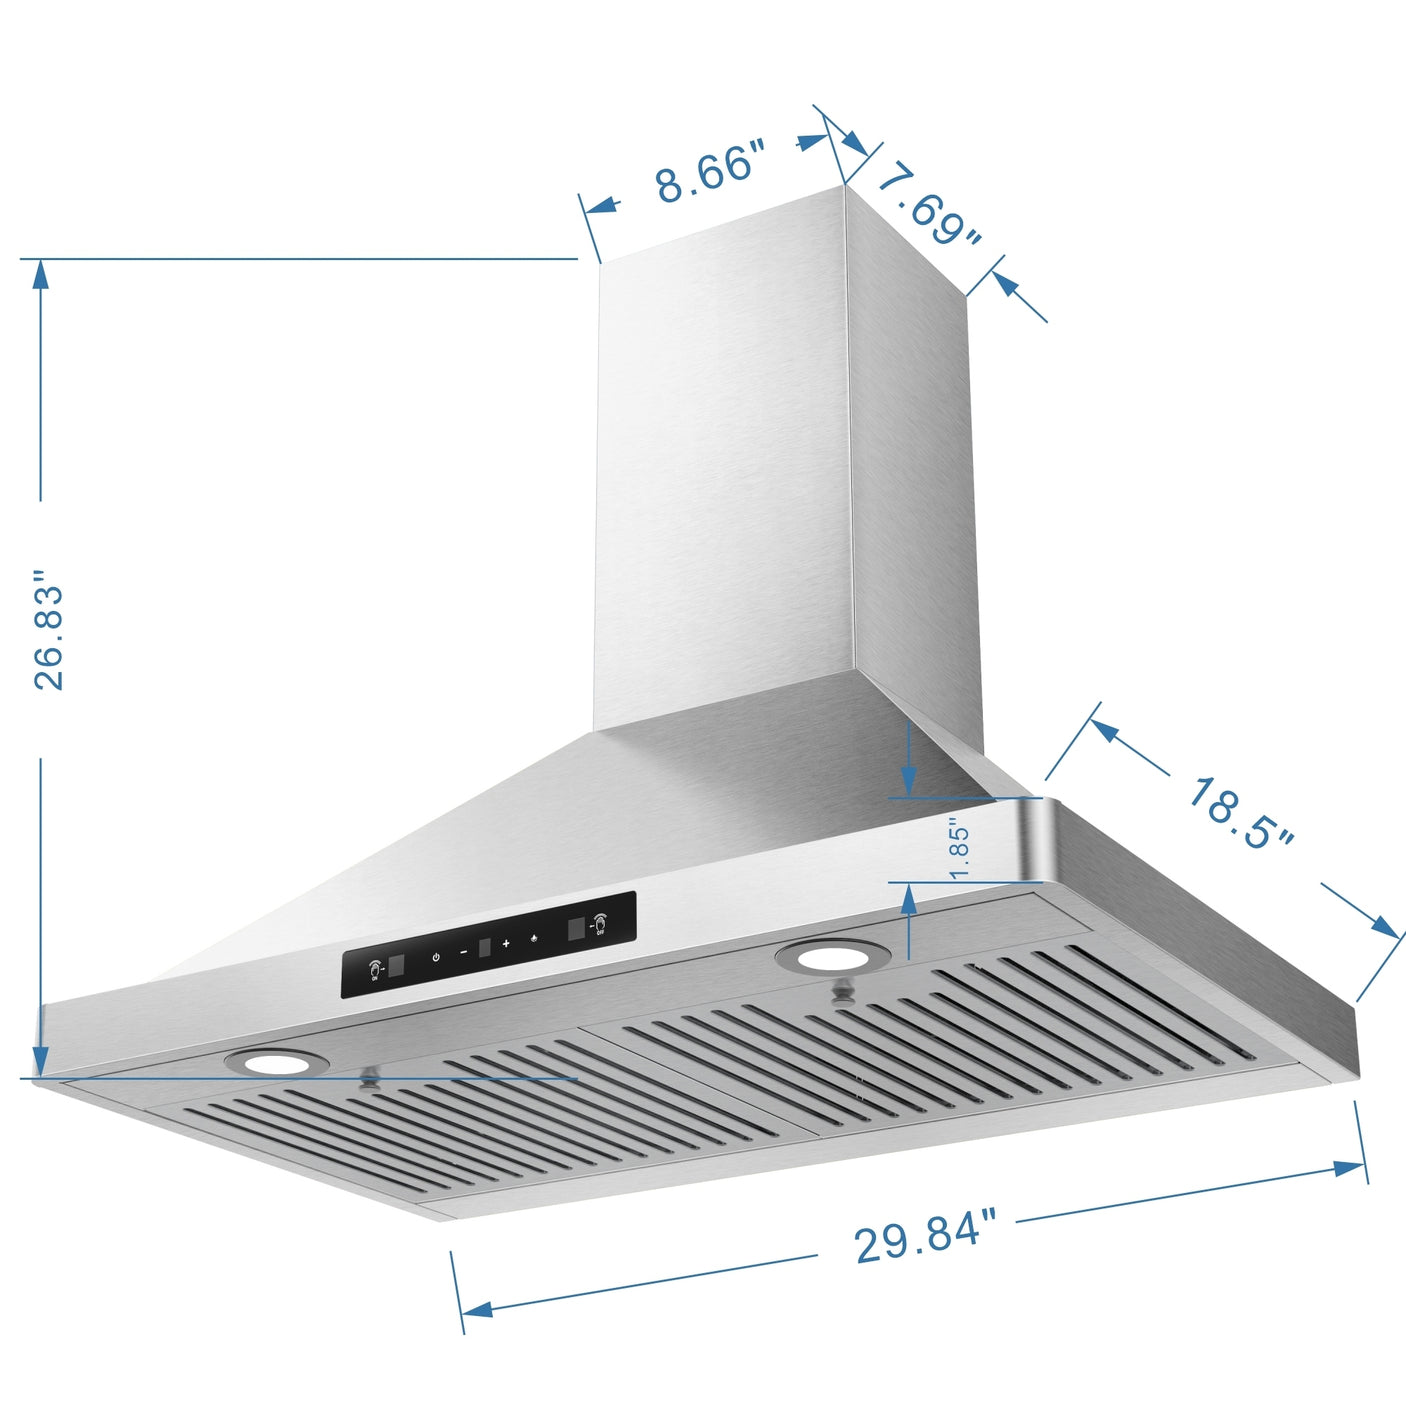 30 inch Wall Mounted Stainless Steel Range Hood with One Motor, LED Screen Finger Touch Control